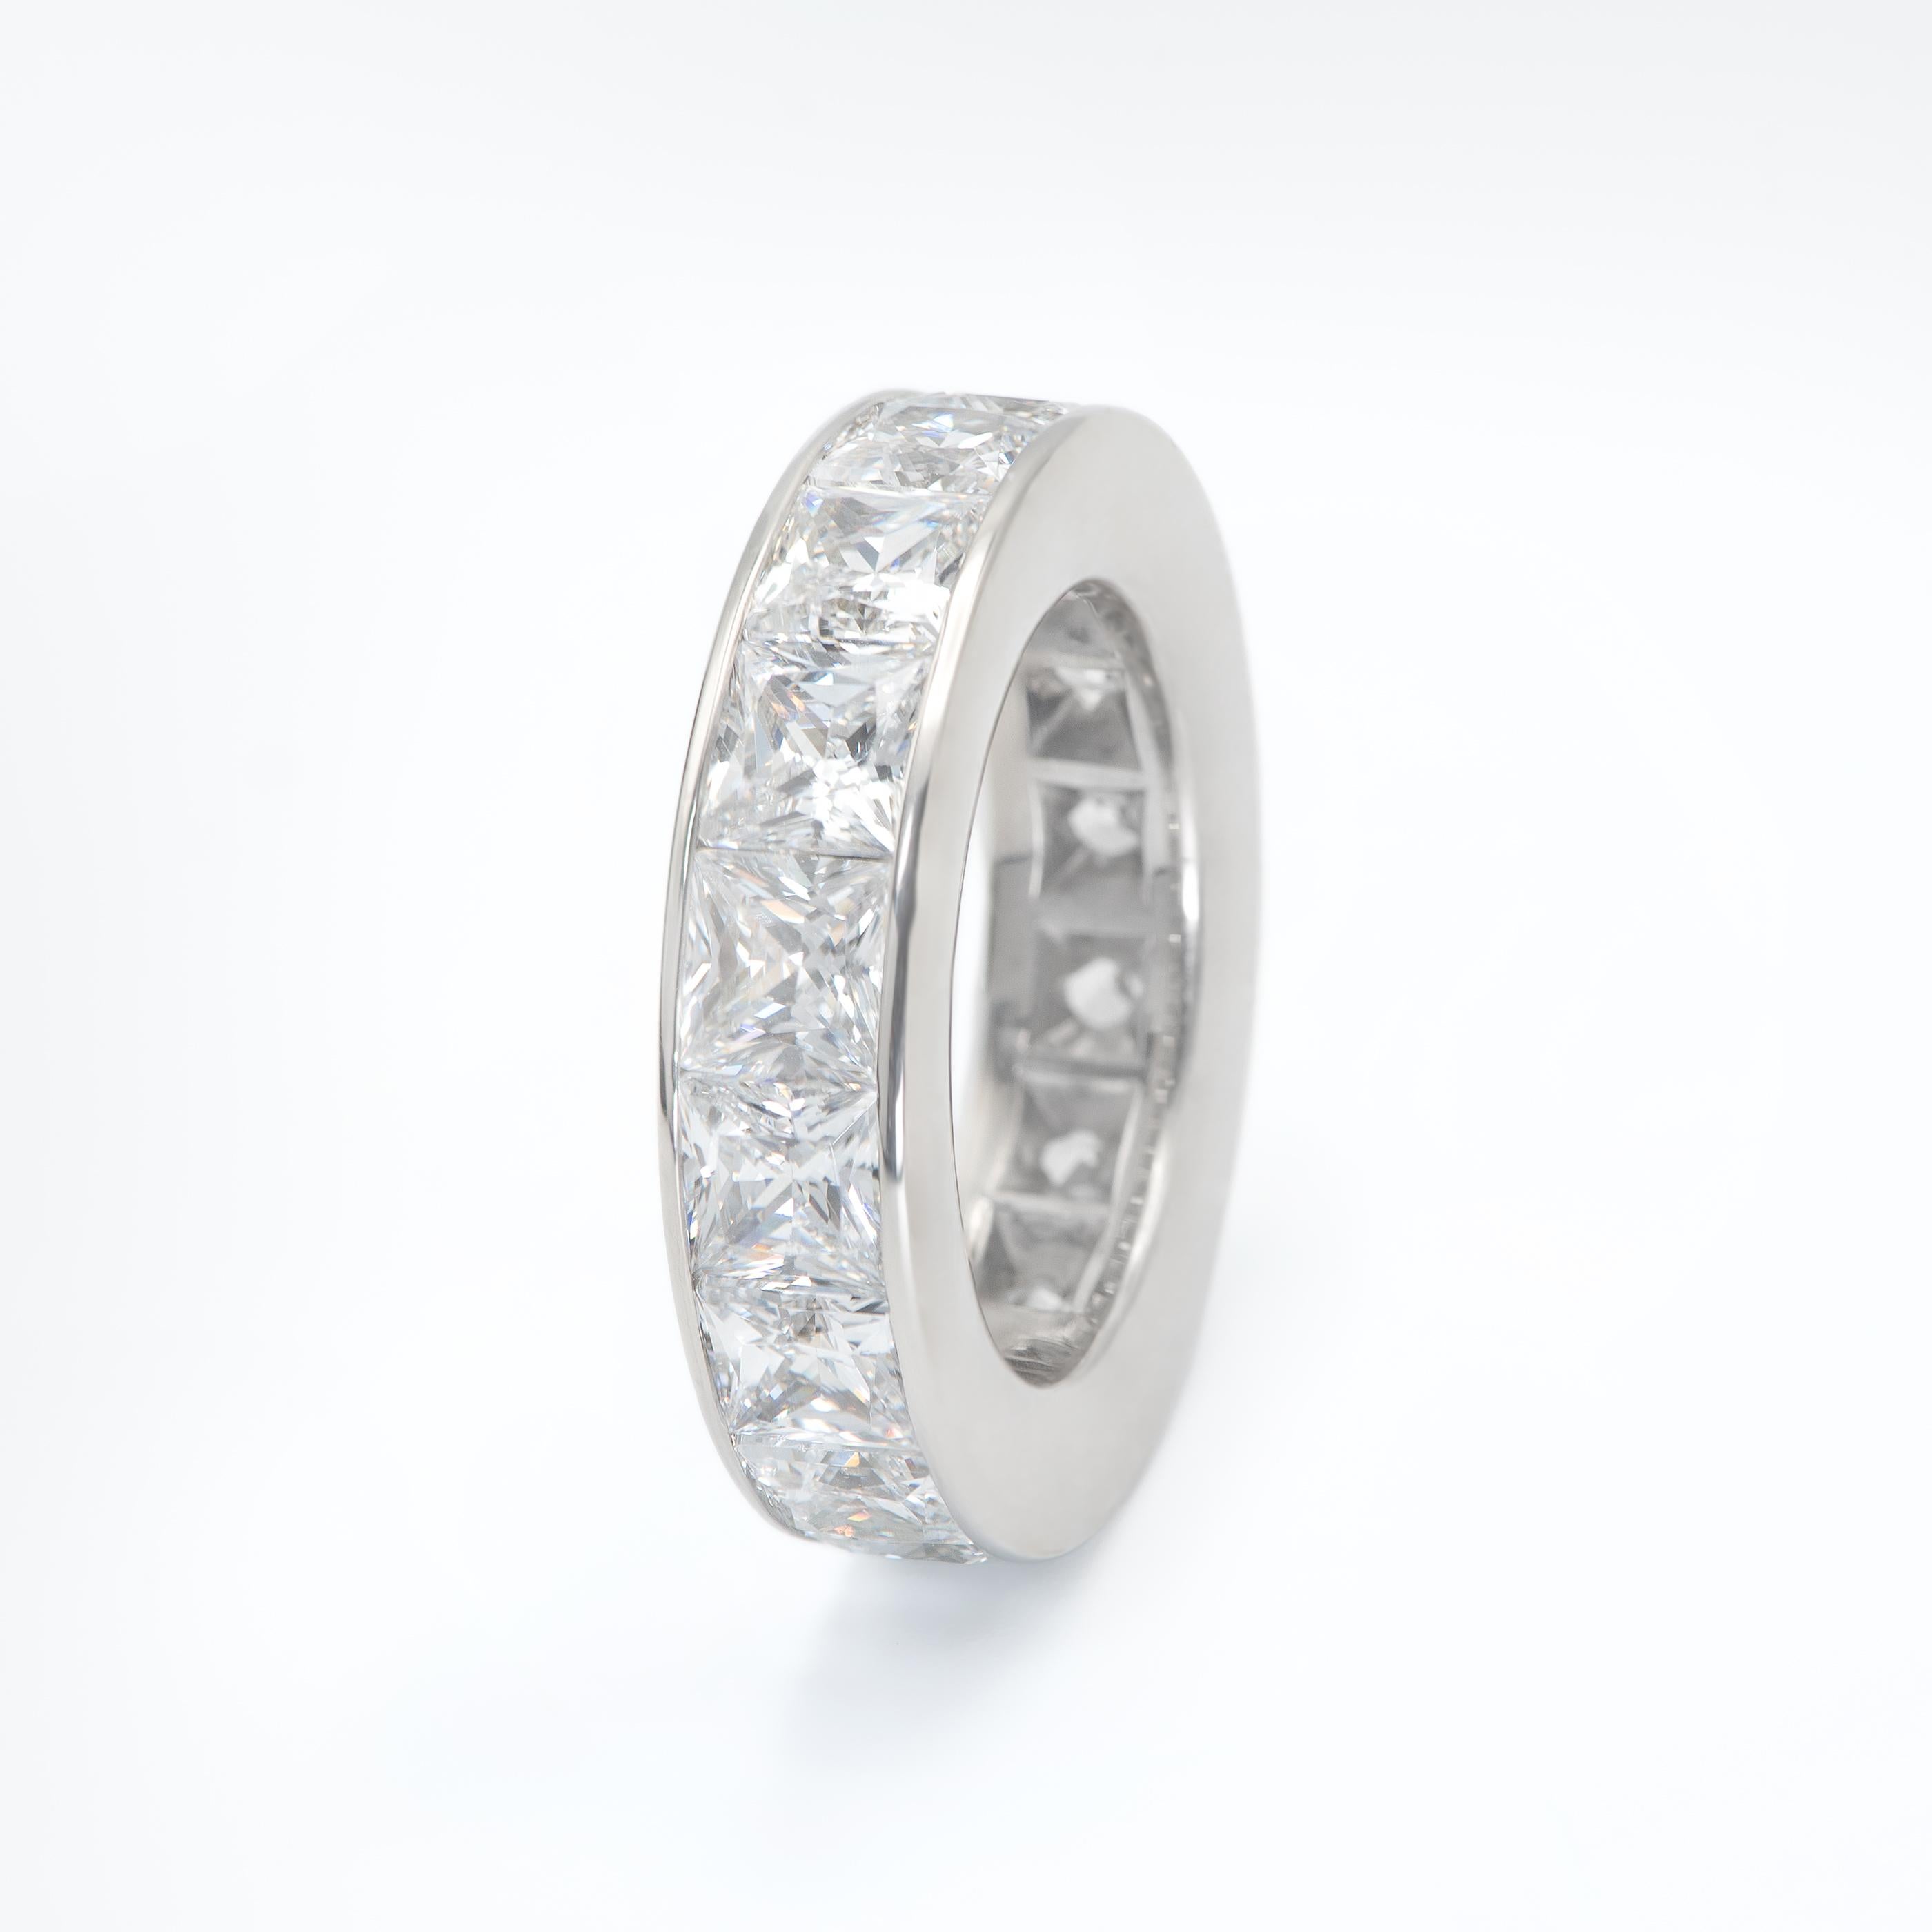 15 Princess Cut Diamonds weighing 7.56 Carats set in a channel set style Eternity Ring.
Each Stone weighs over 0.50 Carats.
Stones are G-H color and VS Clarity. Set in Platinum. Size 5.5.